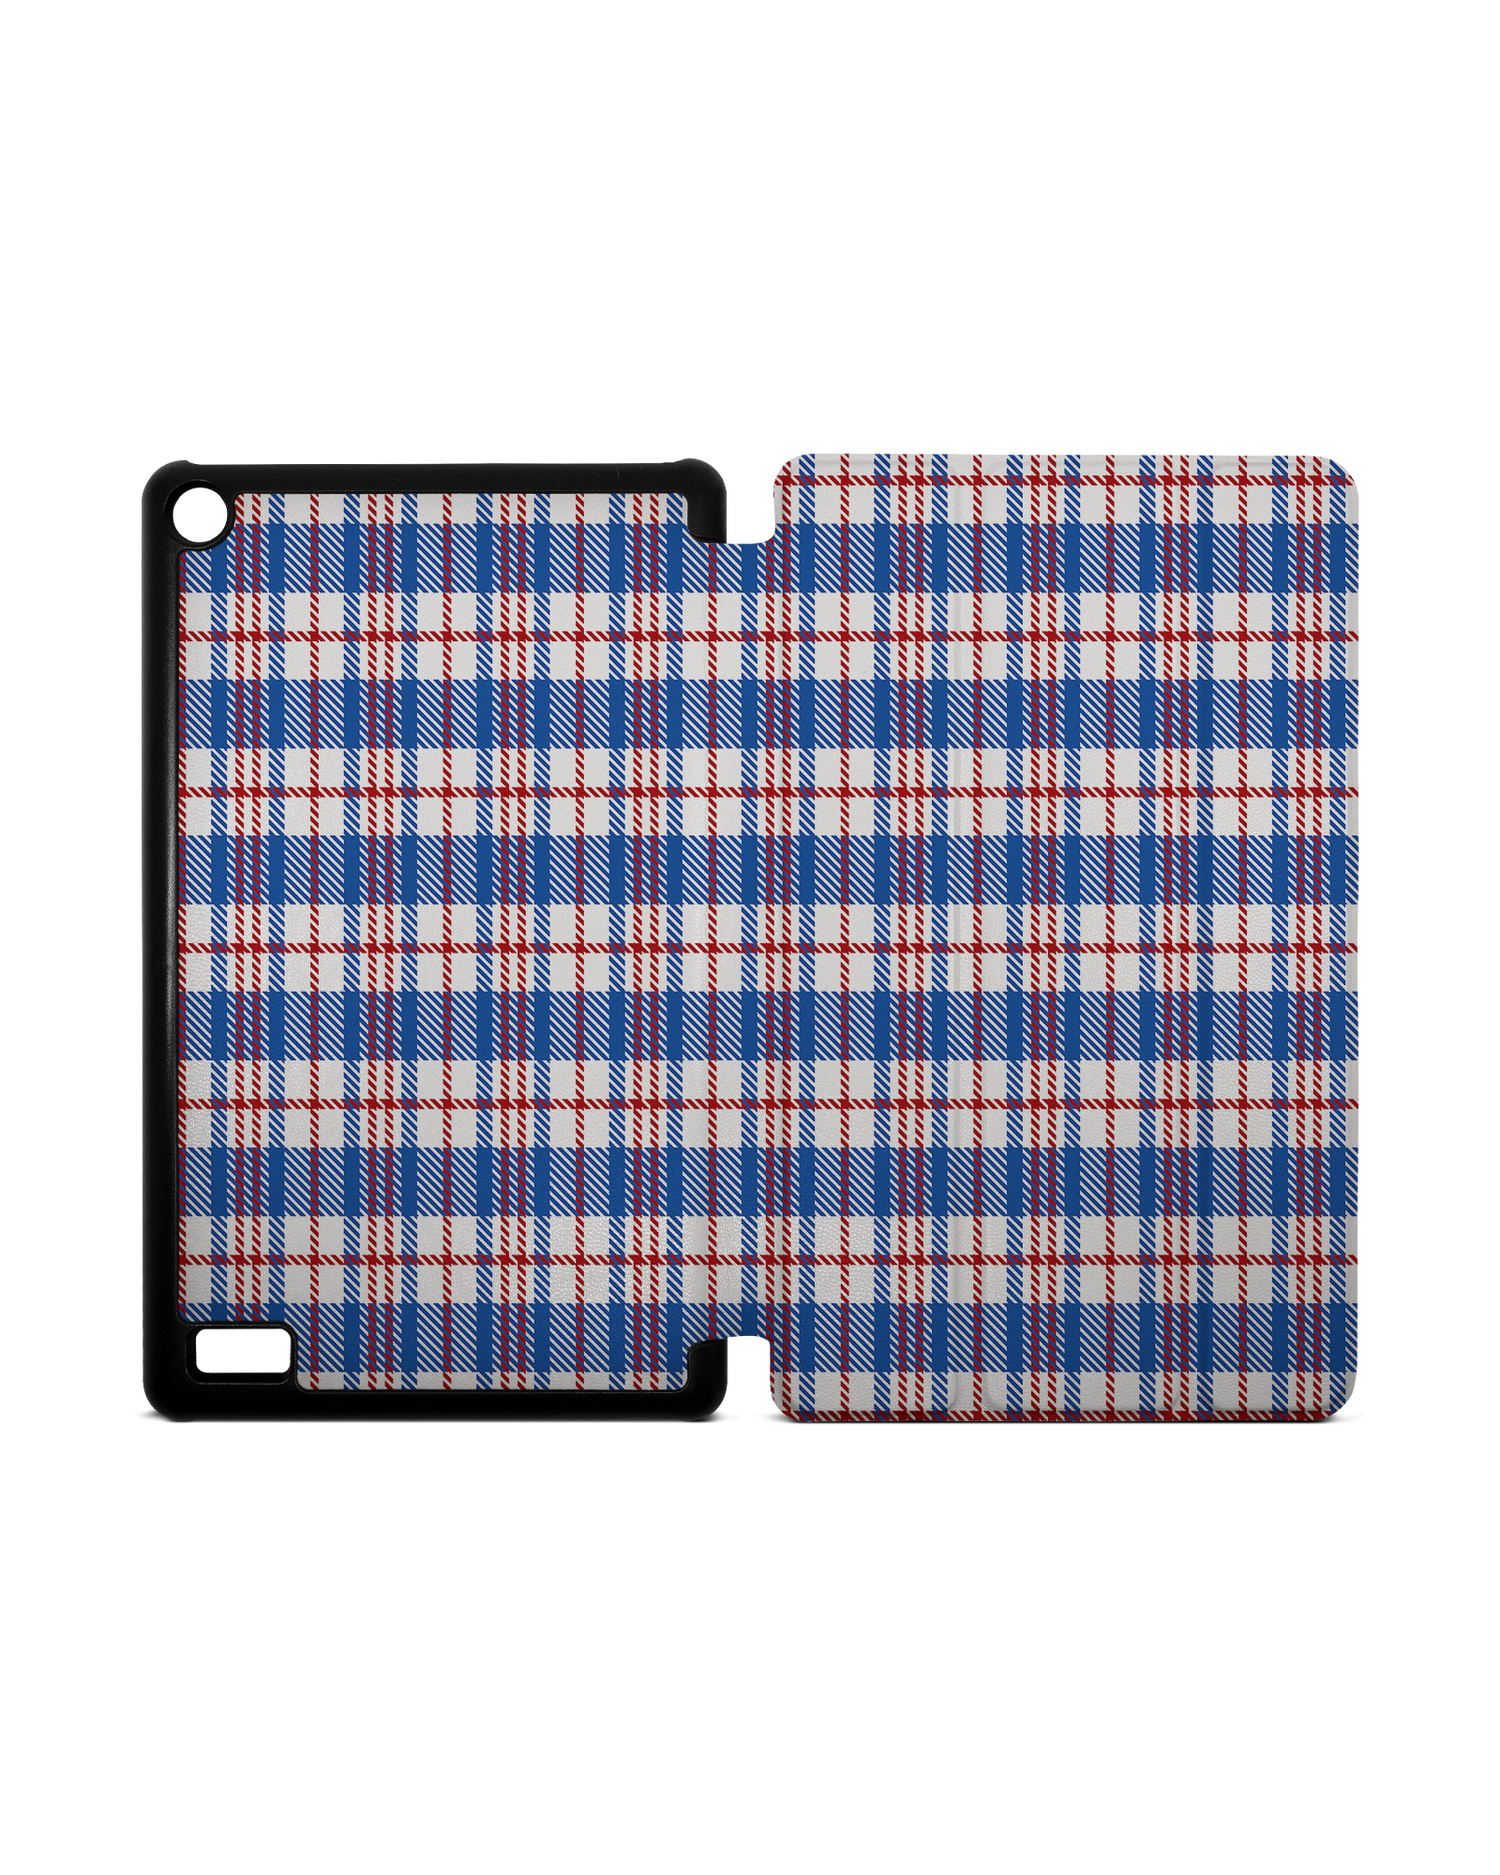 Plaid Market Bag Tablet Smart Case for Amazon Fire 7: Opened